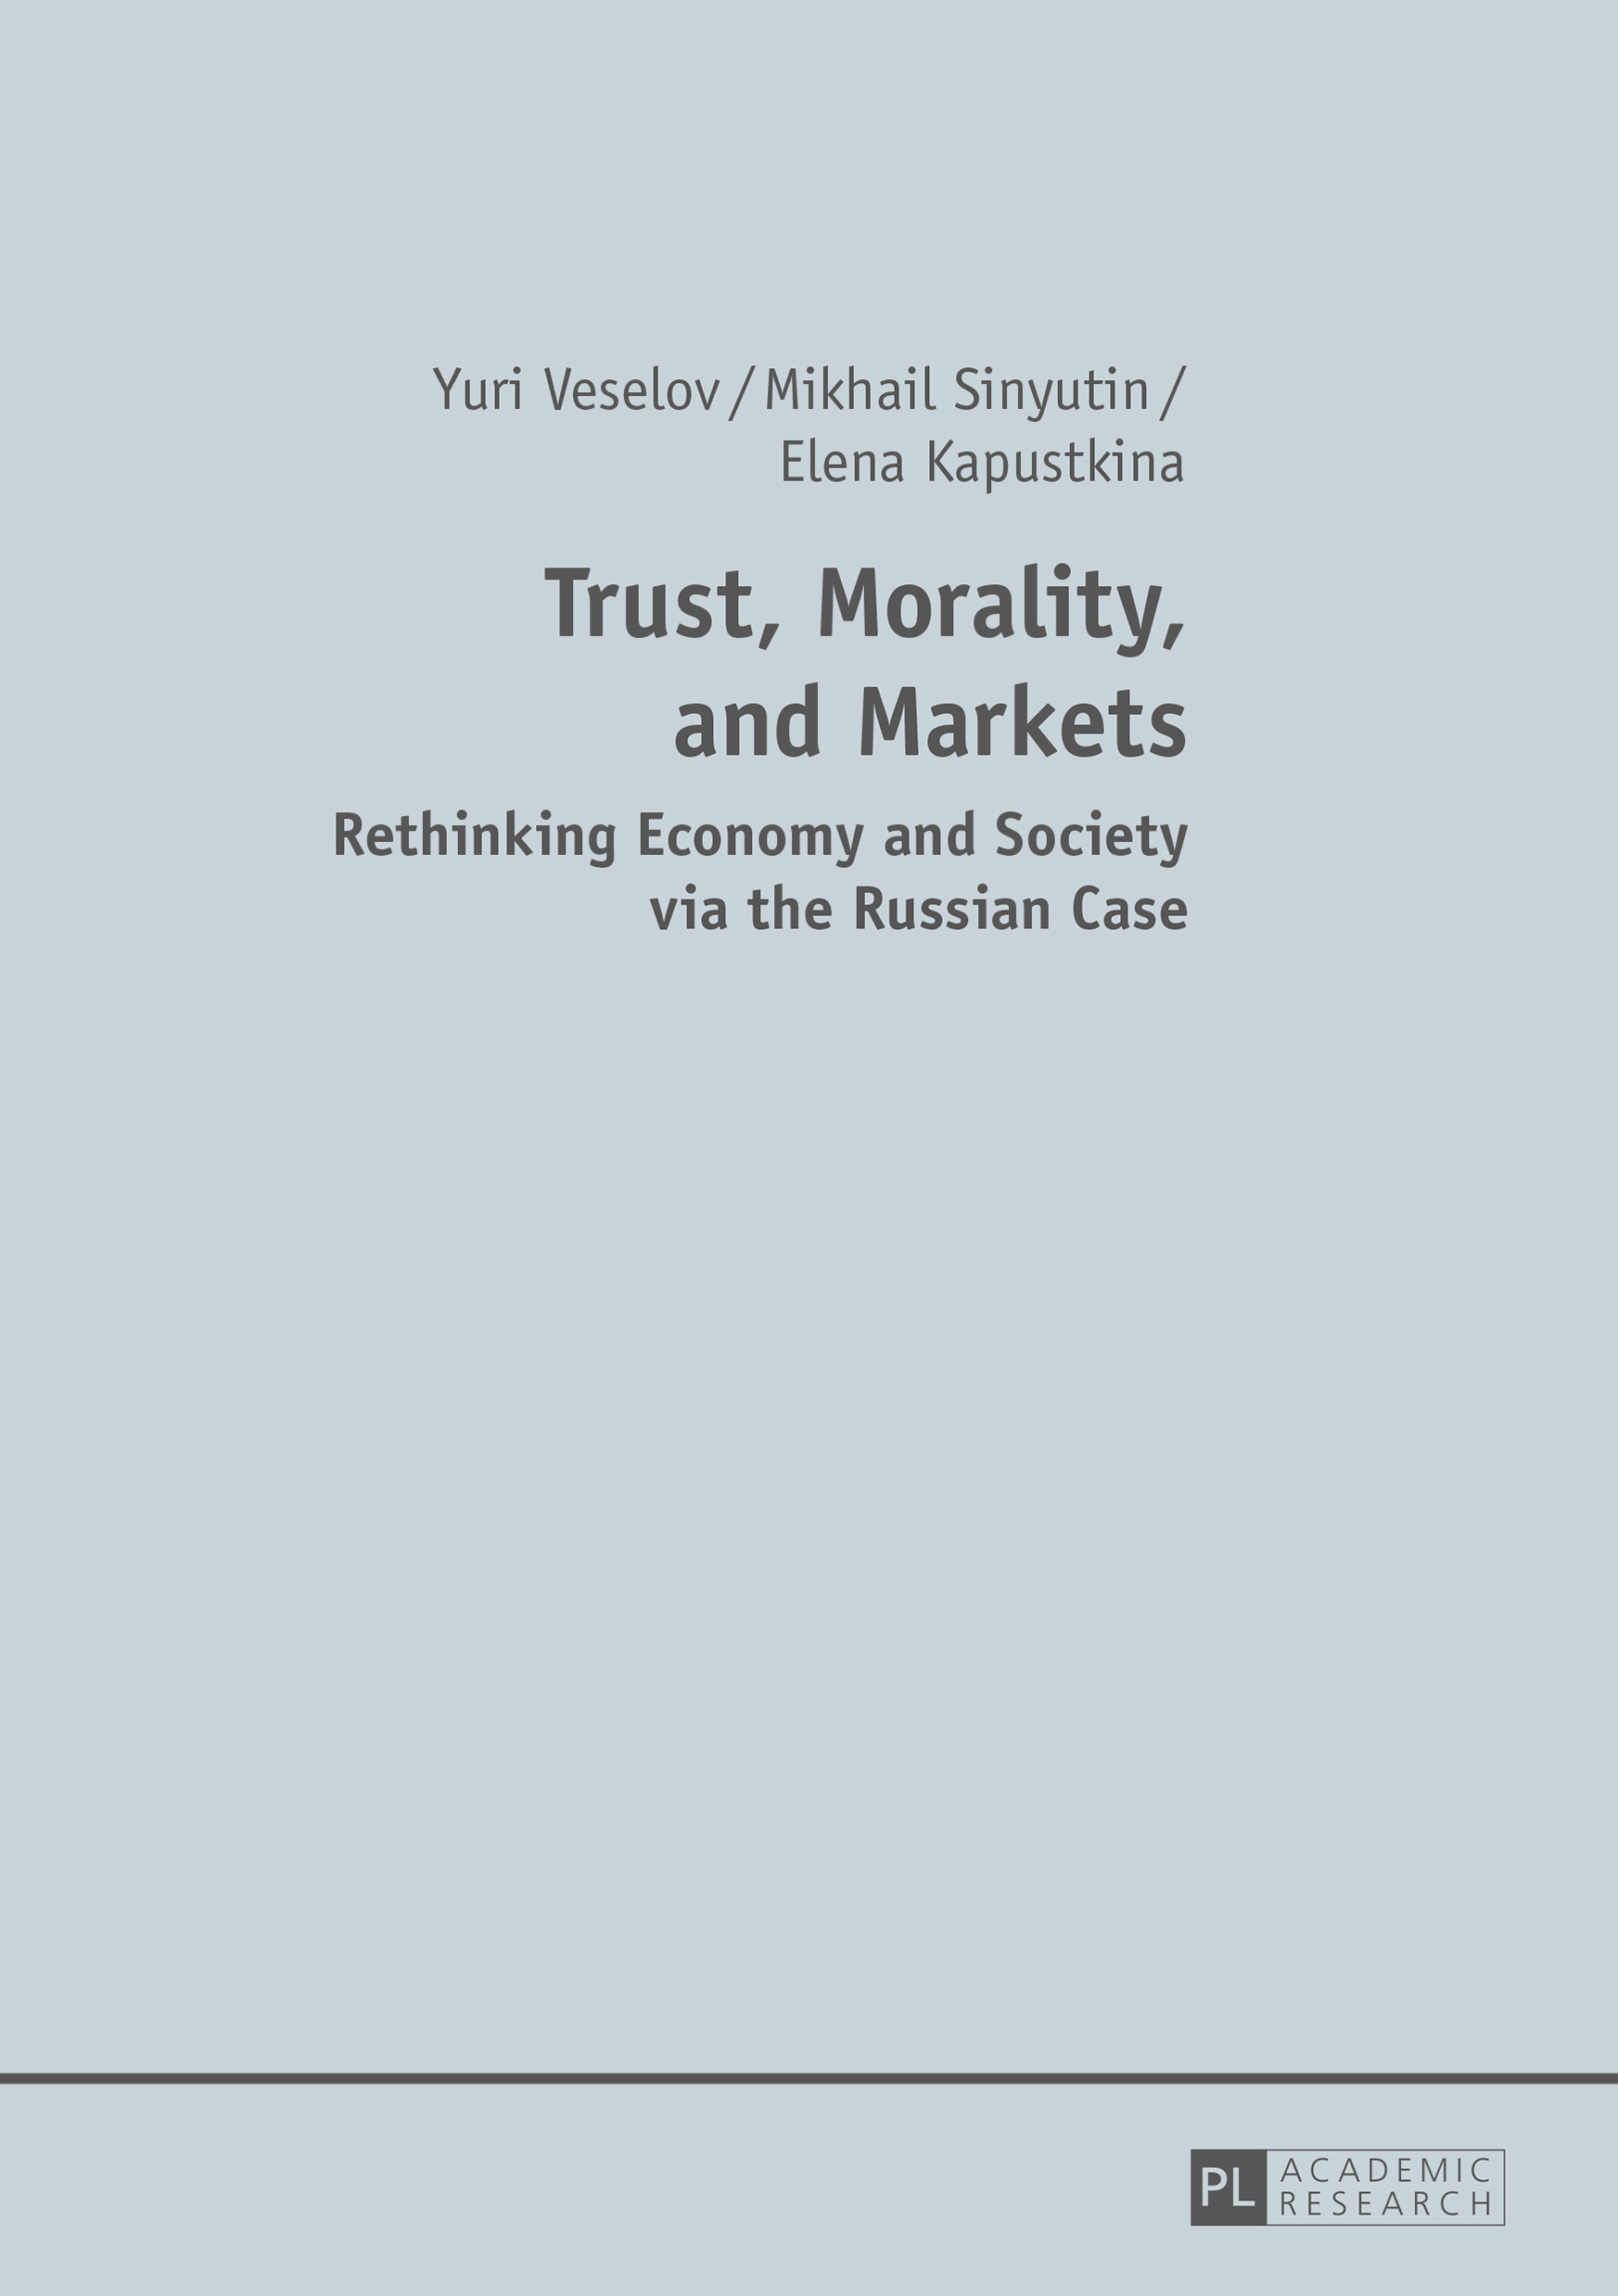 Trust, Morality, and Markets